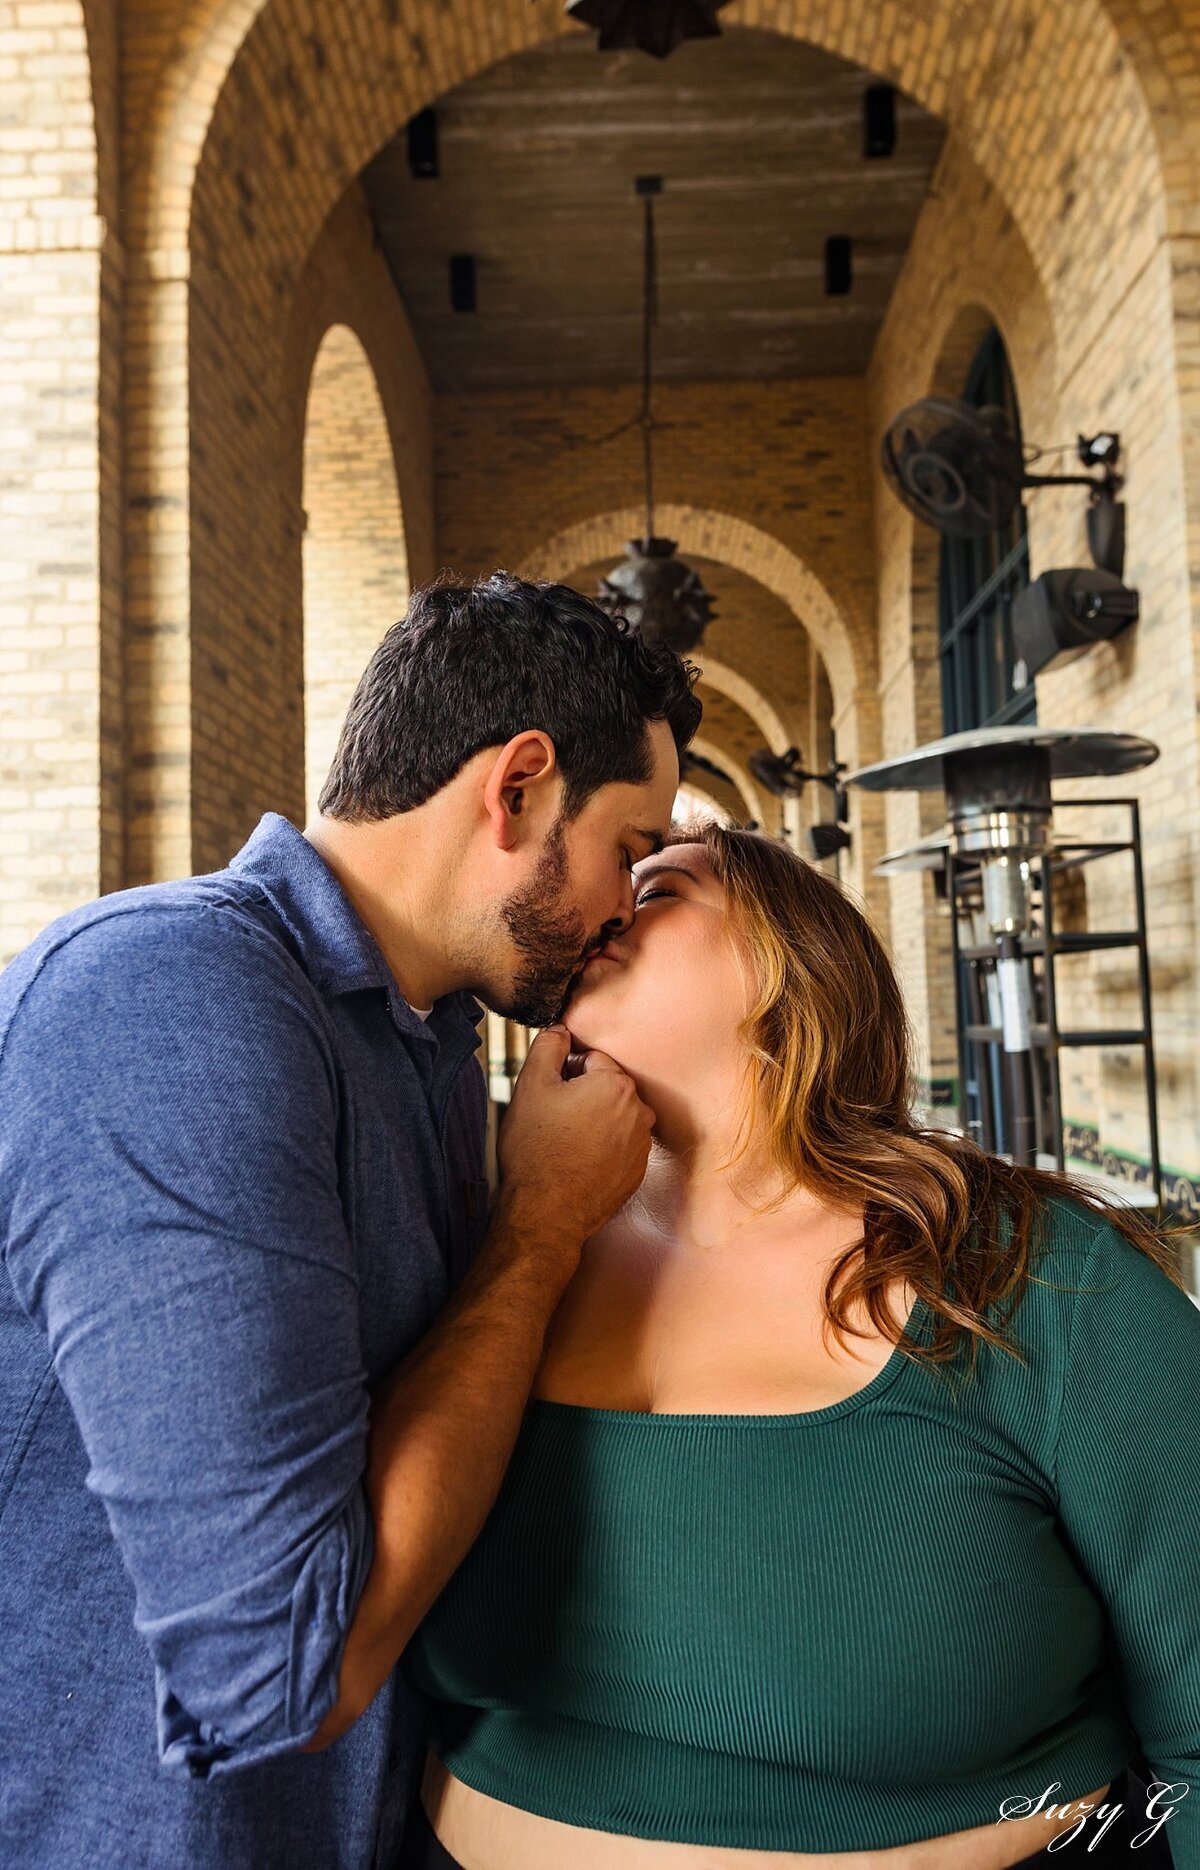 Engagements- Texas Engagement Photography - Suzy G -Suzy G Photography_0015